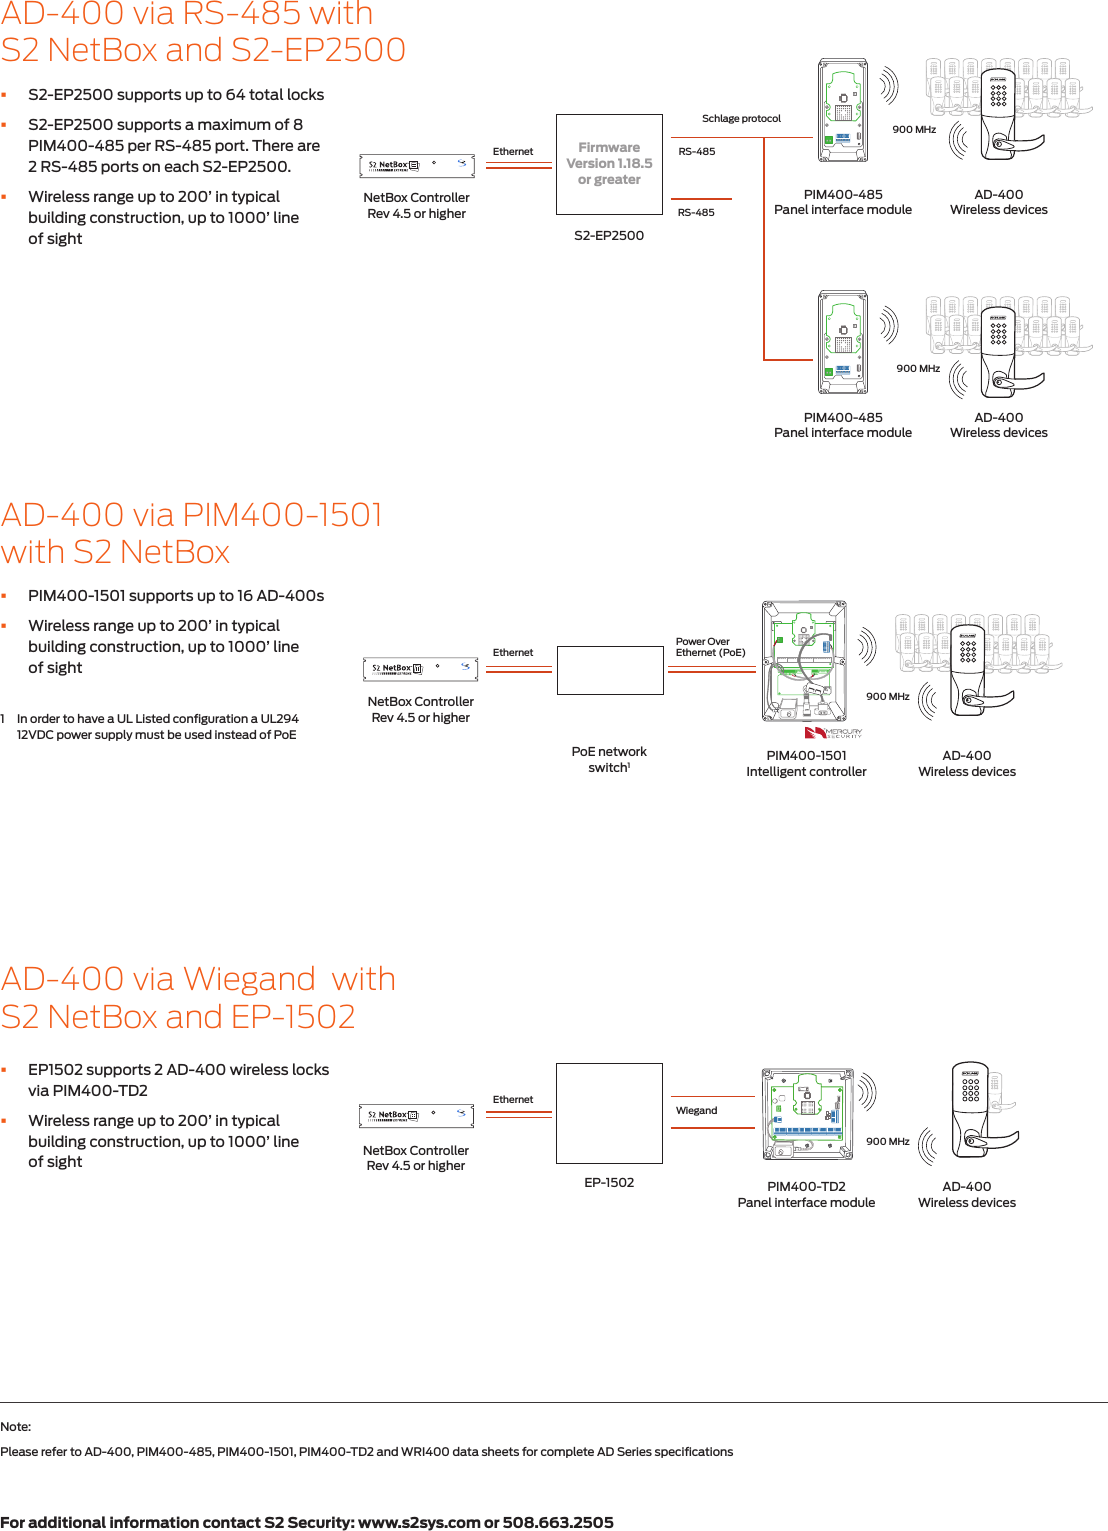 Page 2 of 4 - Schlage Electronics  S2 Security Access Control Solution Sheet With AD-400 109822